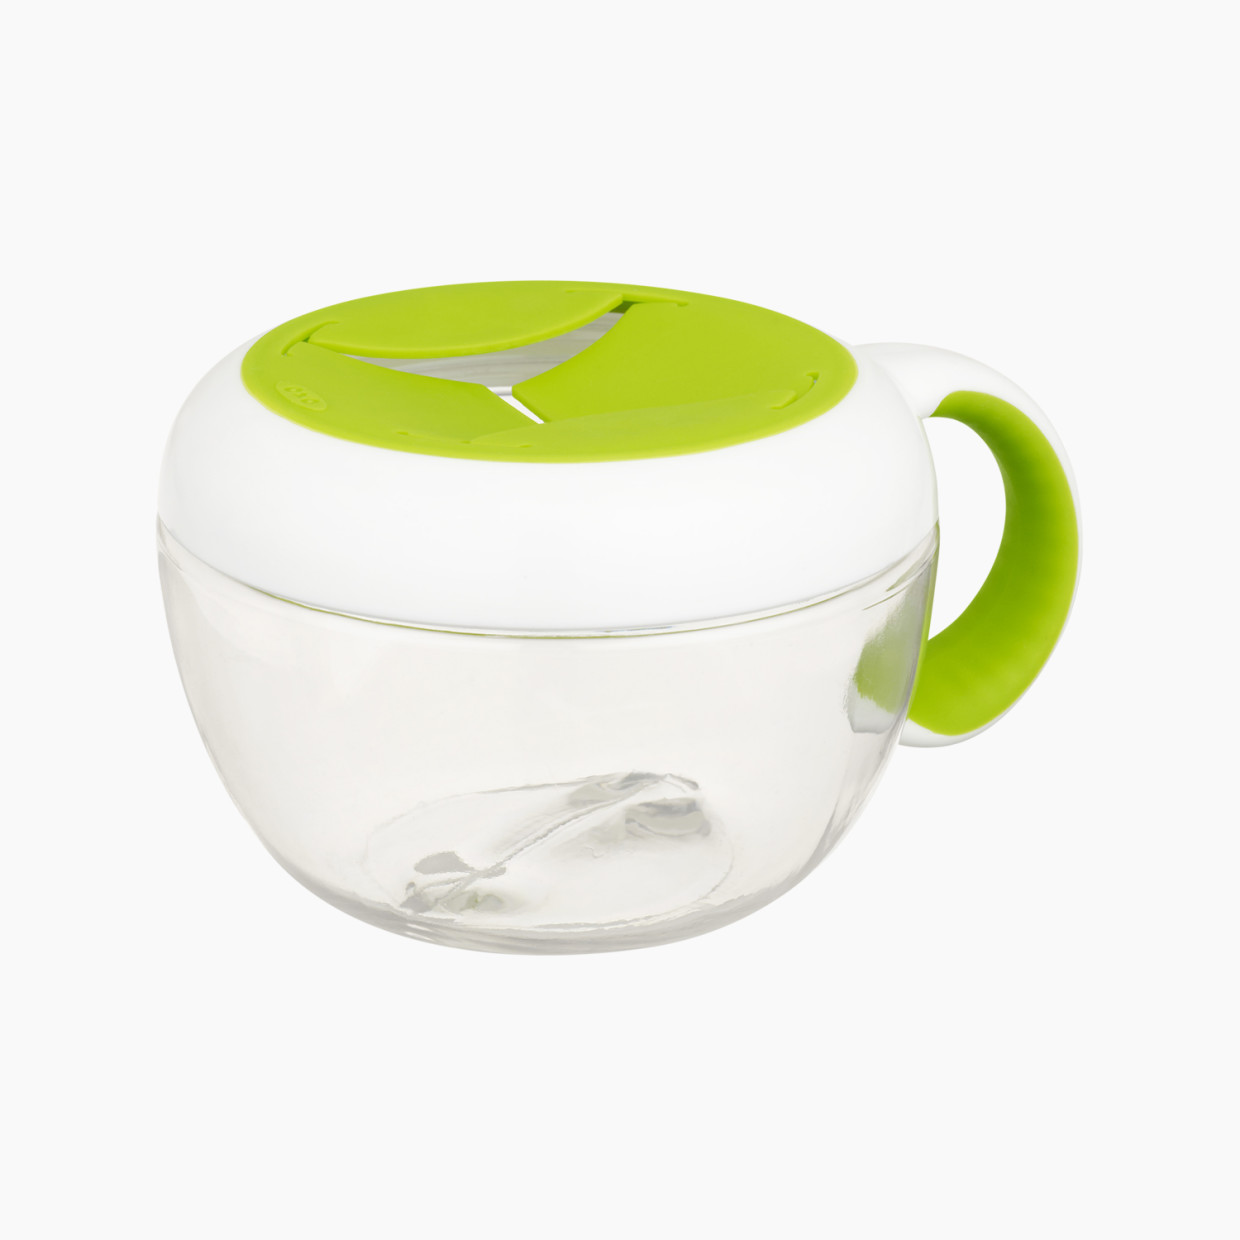 OXO Tot Flippy Snack Cup with Travel Lid - Green.